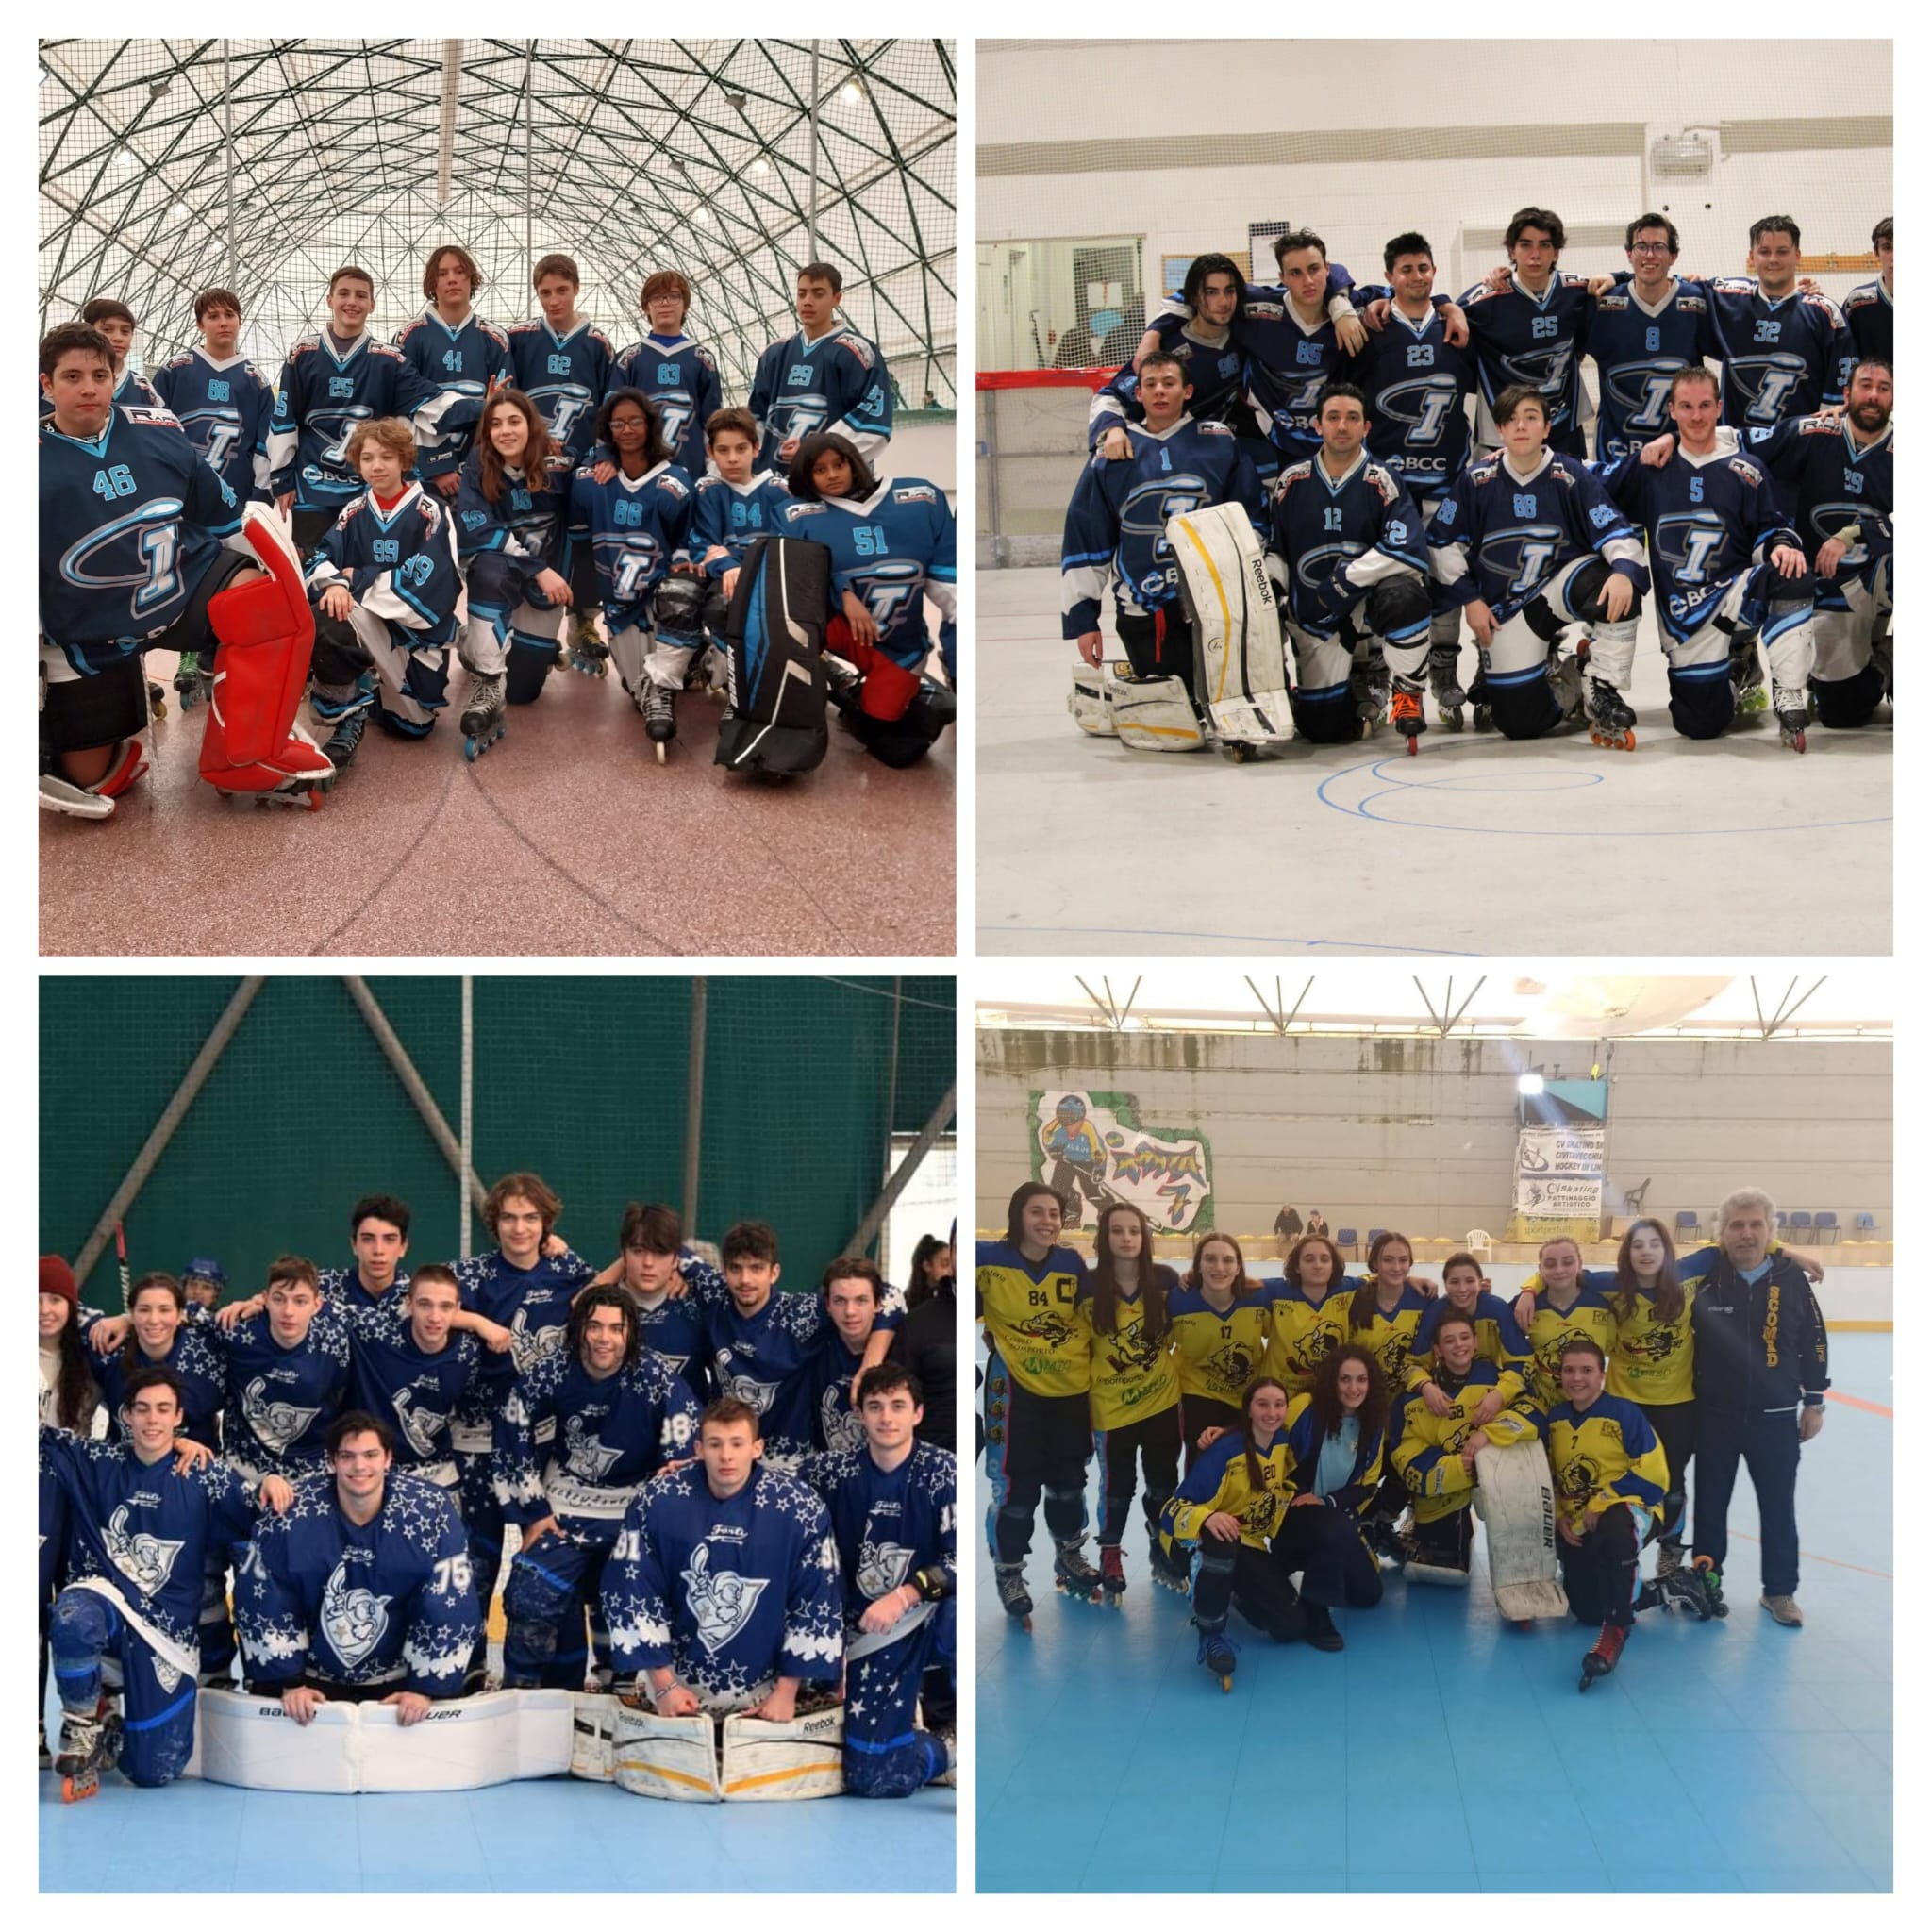 Weekend a tutto Hockey